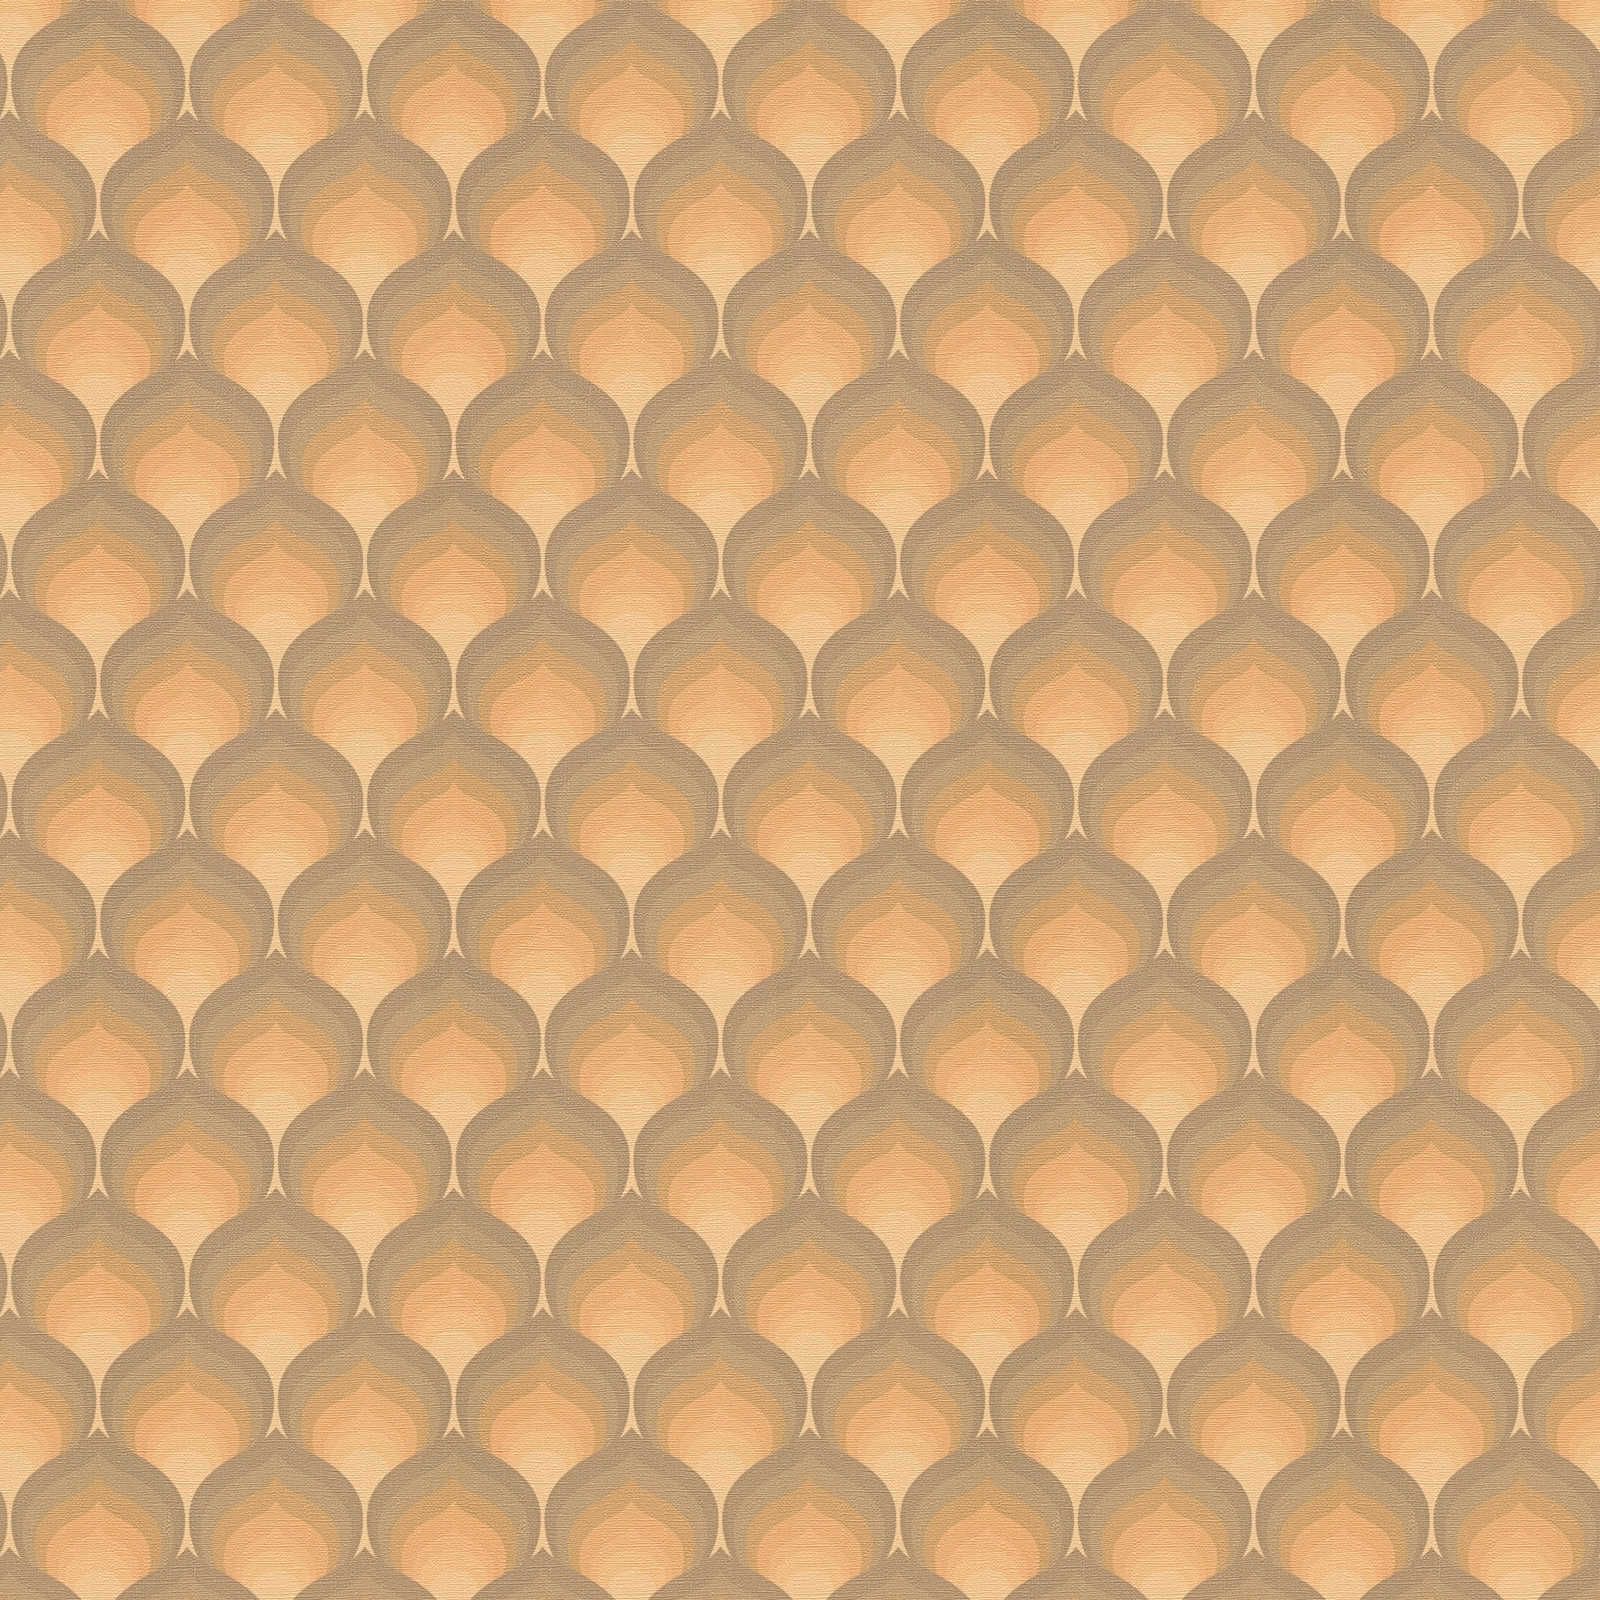 Retro wallpaper with textured scale pattern - brown, yellow, orange
